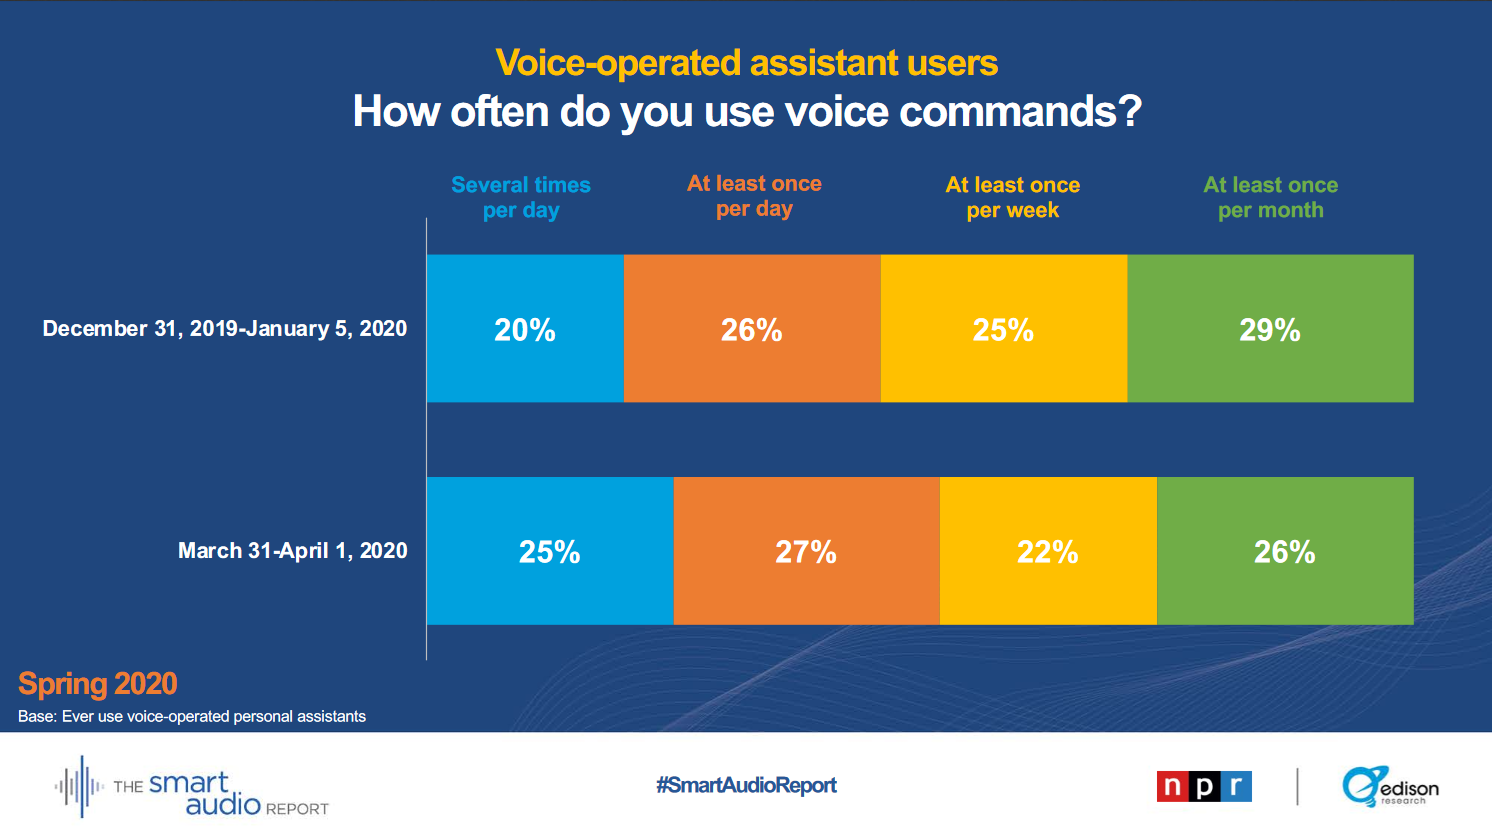 Voice Assistants See Uptick in Daily Use During the Pandemic